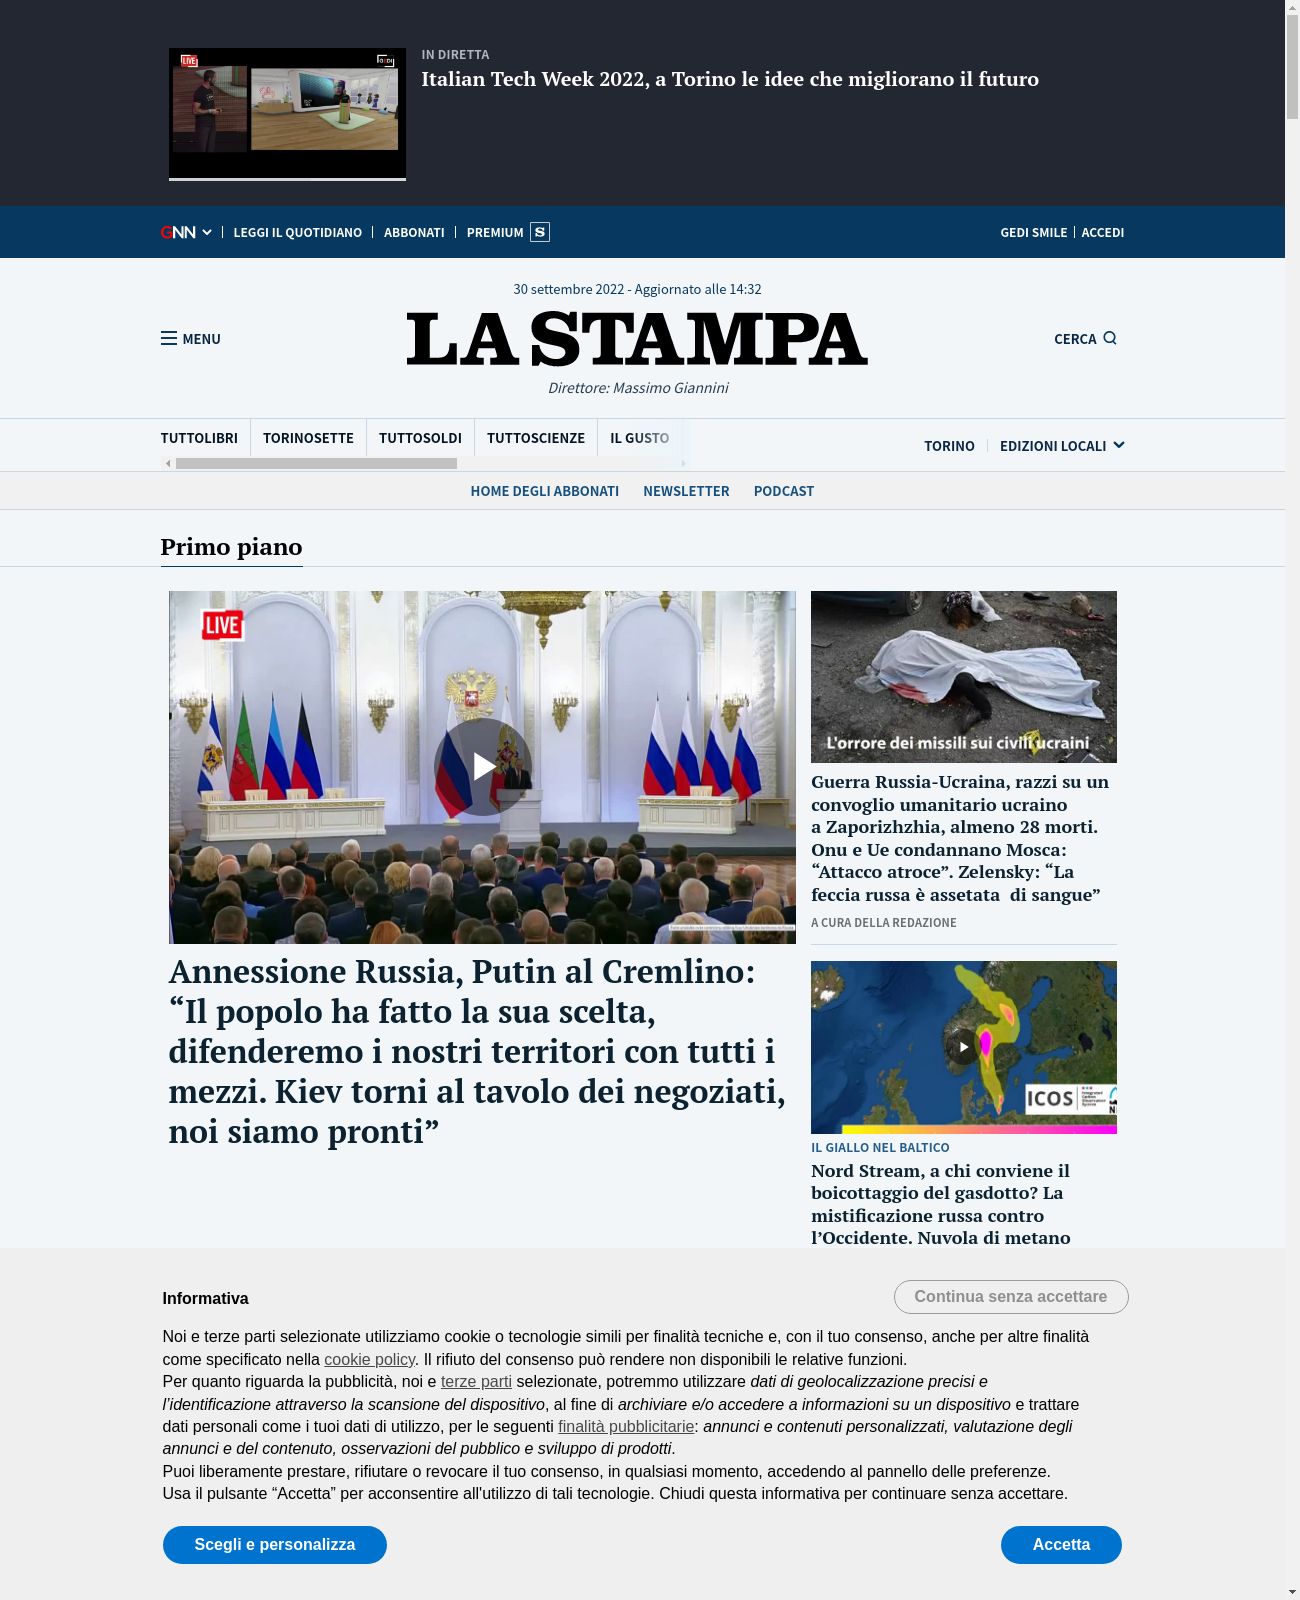 La Stampa at 2022-09-30 15:04:45+02:00 local time